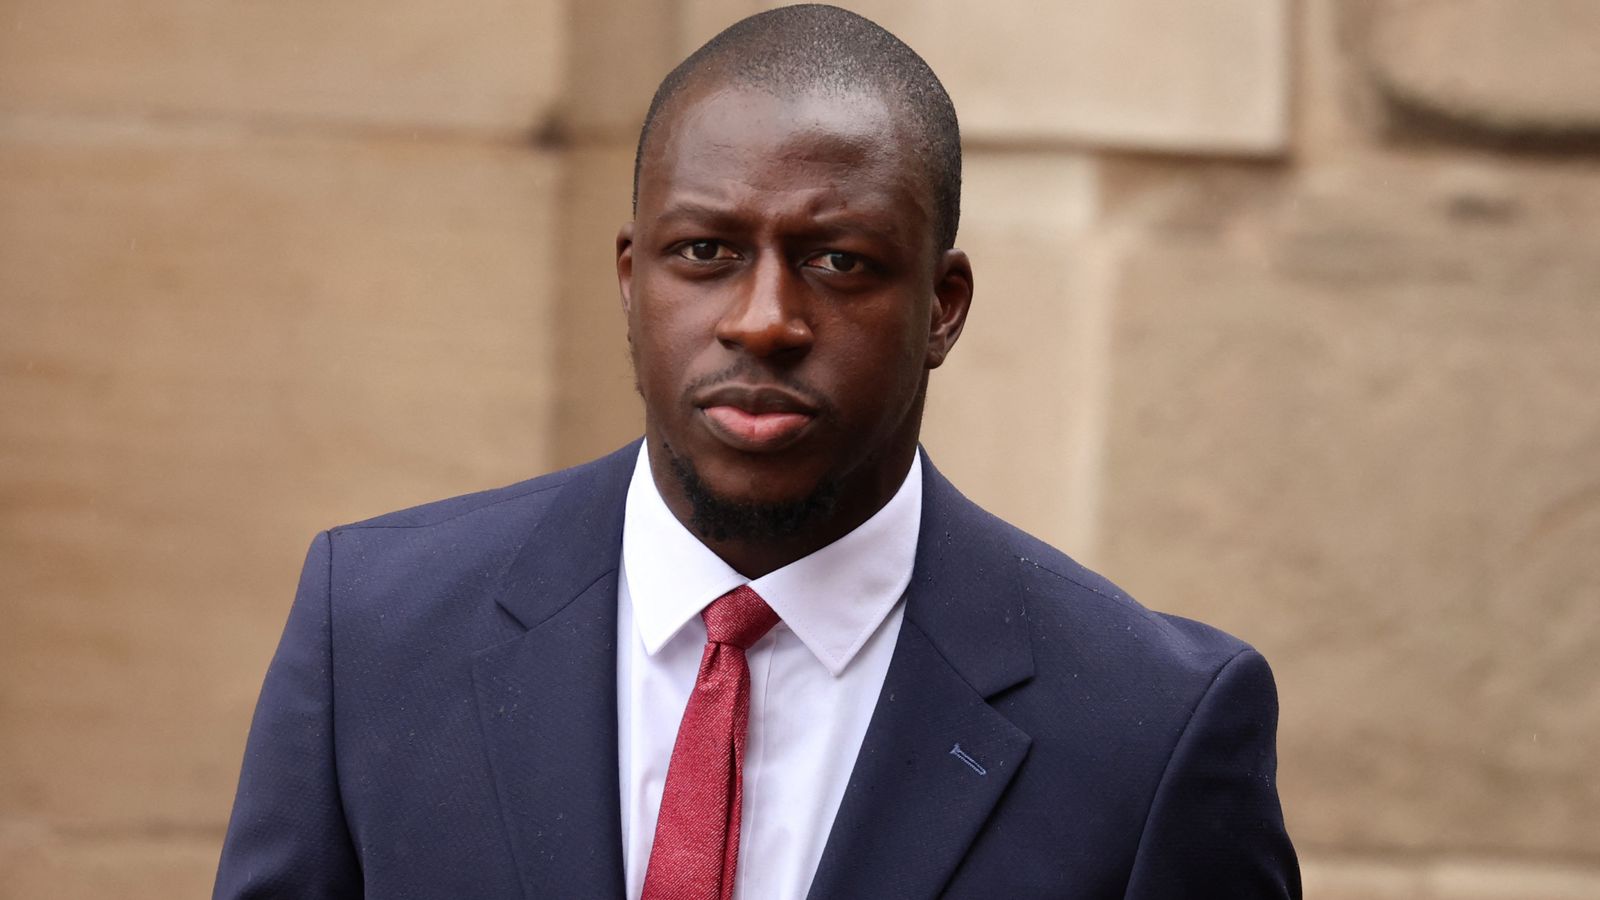 Benjamin Mendy sues Manchester City for unpaid wages during rape and sexual assault charge | UK News